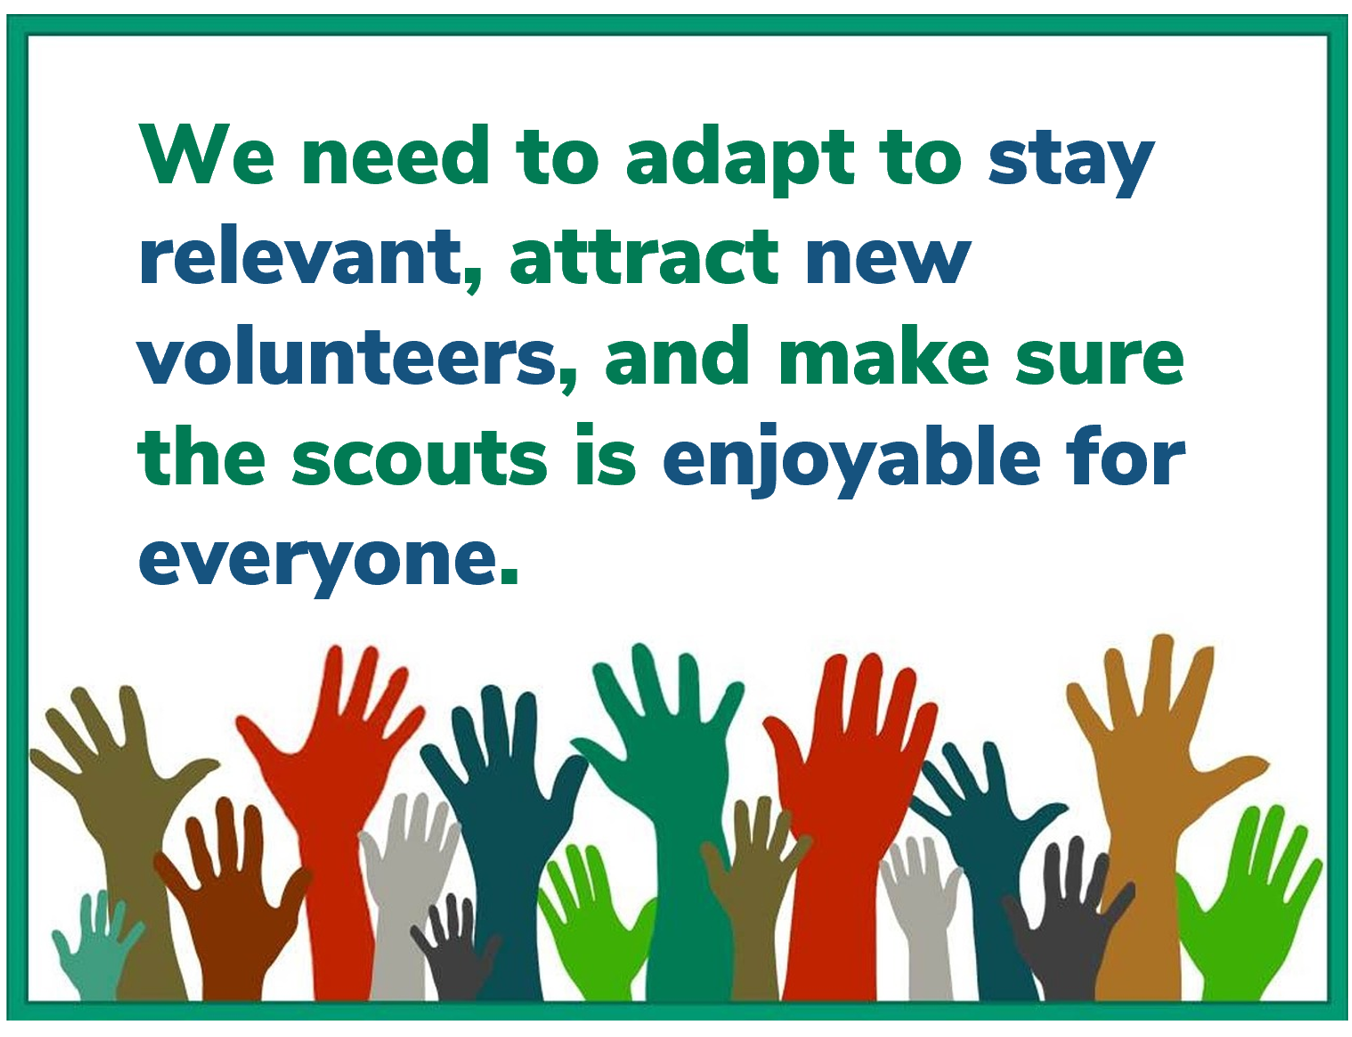 We need to adapt to stay relevant, attract new volunteers, and make sure the scouts is enjoyable for everyone 